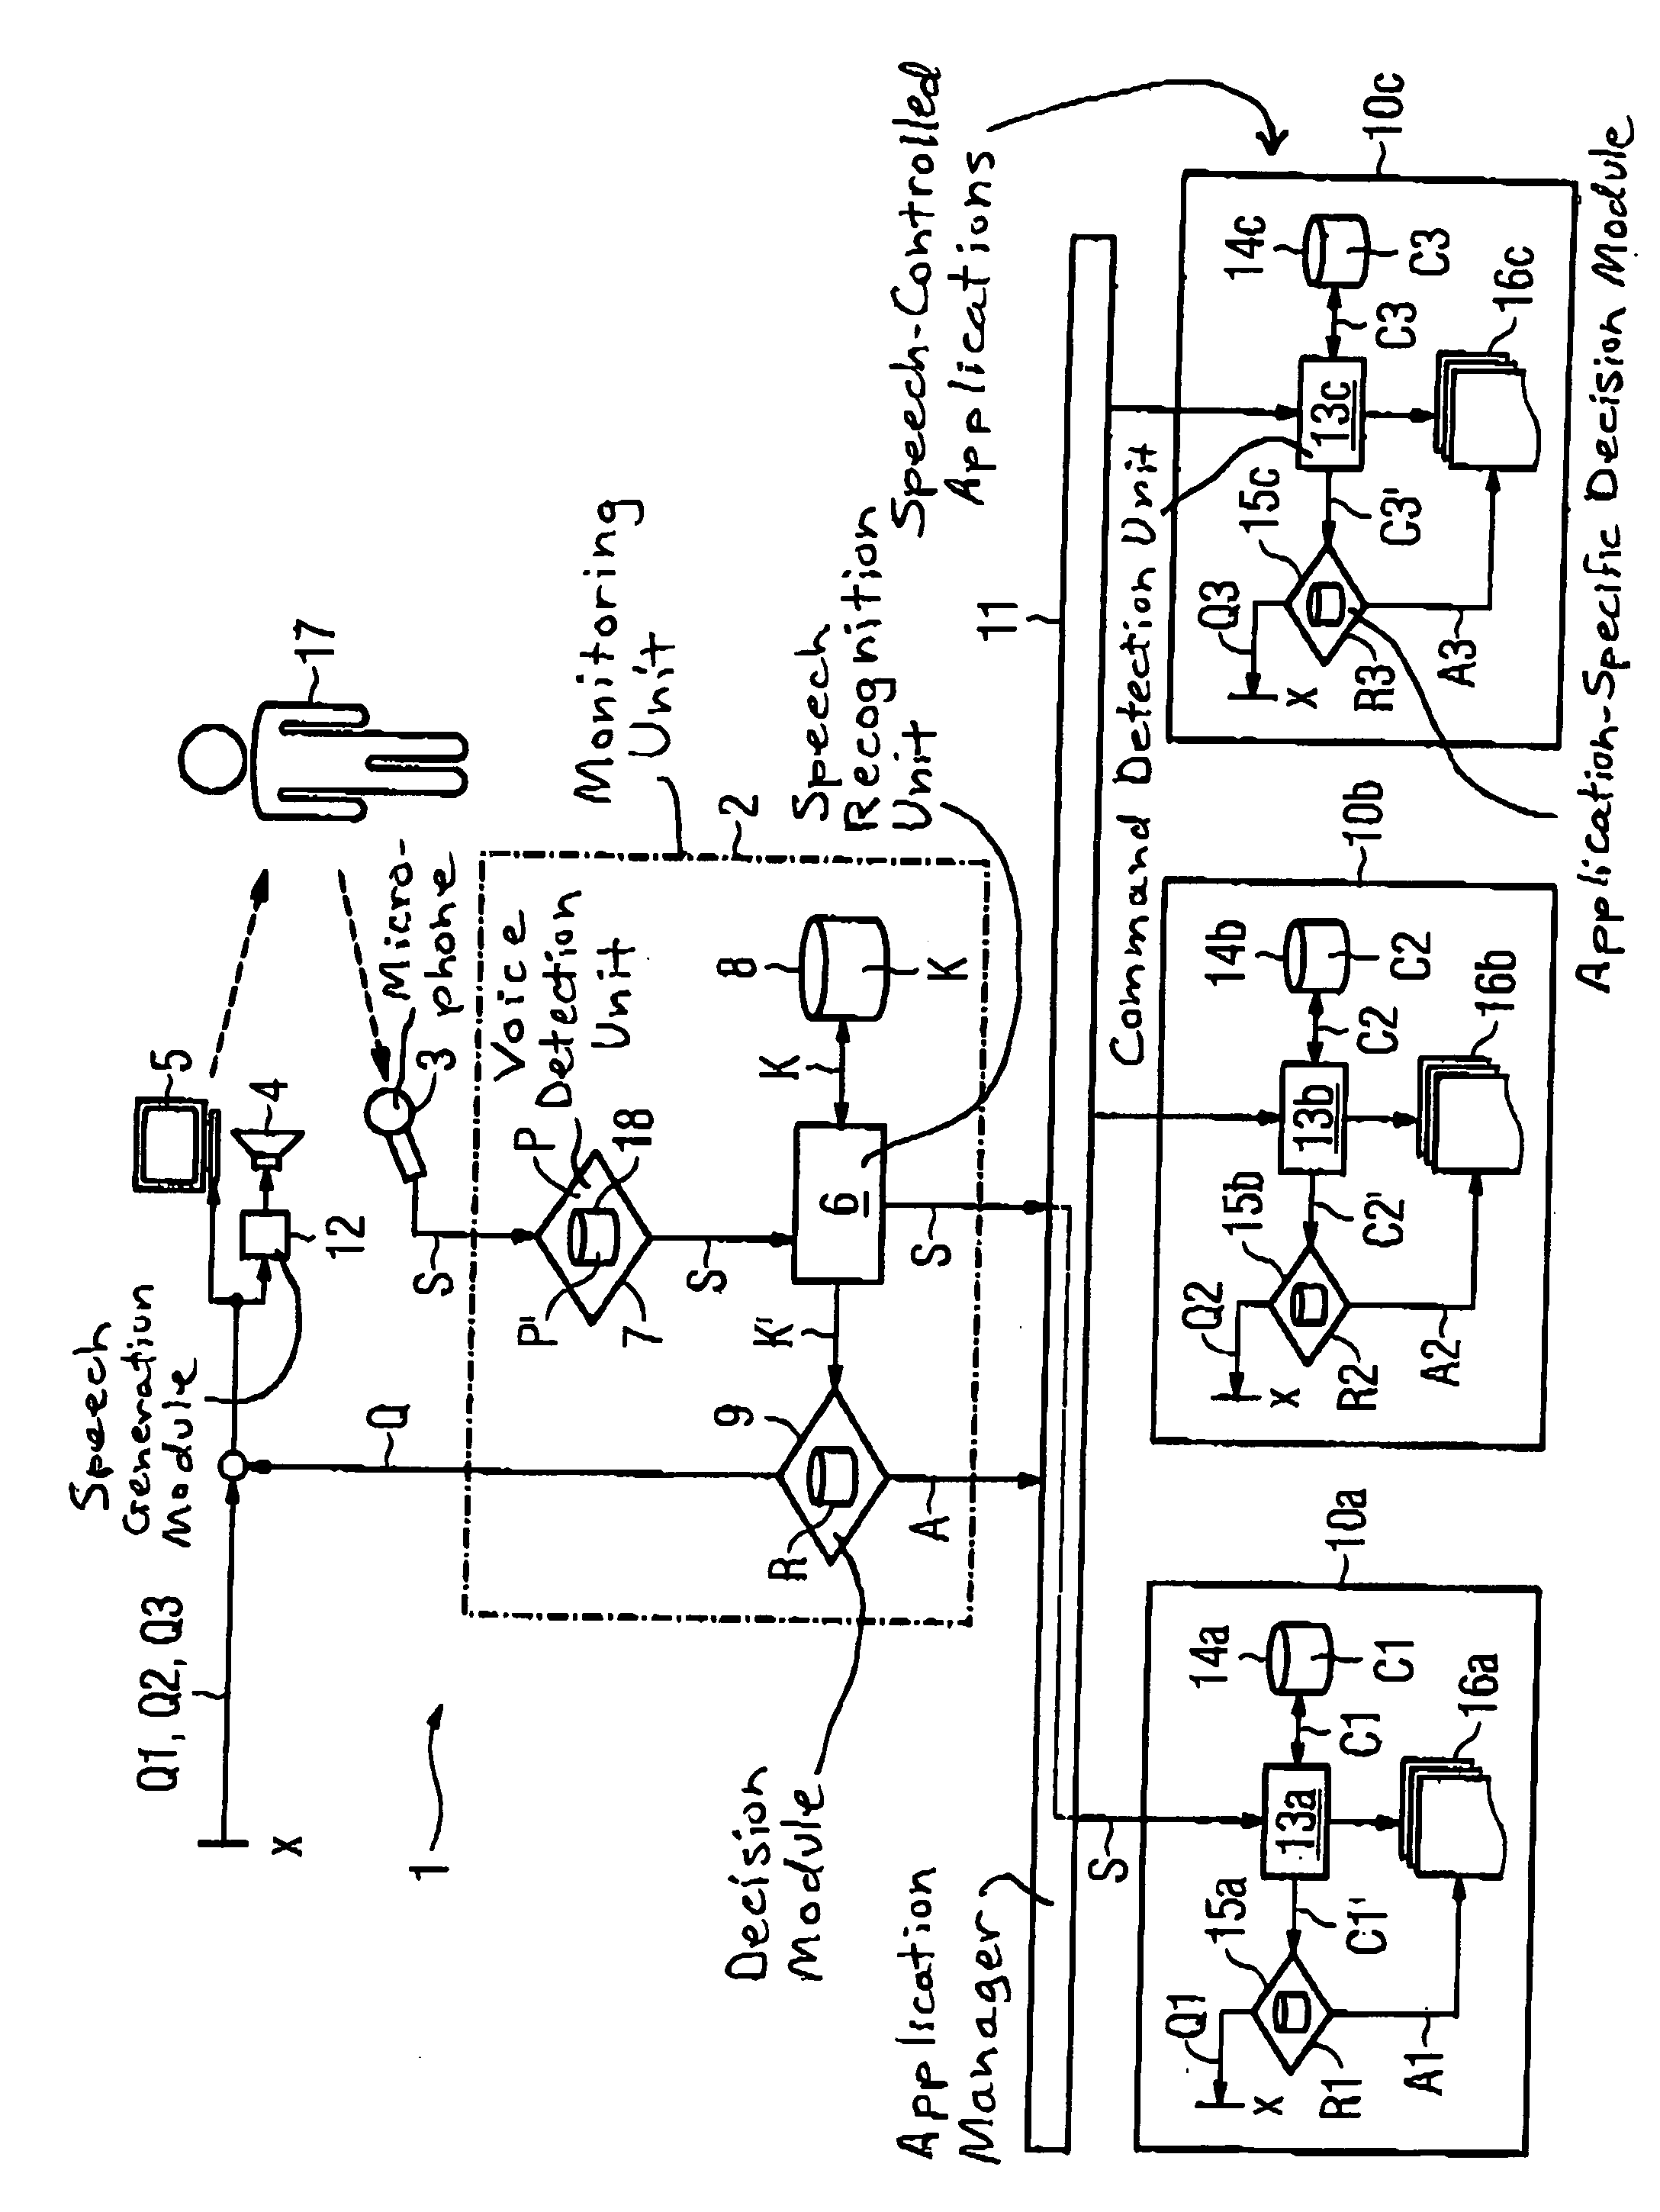 Method and system for monitoring speech-controlled applications